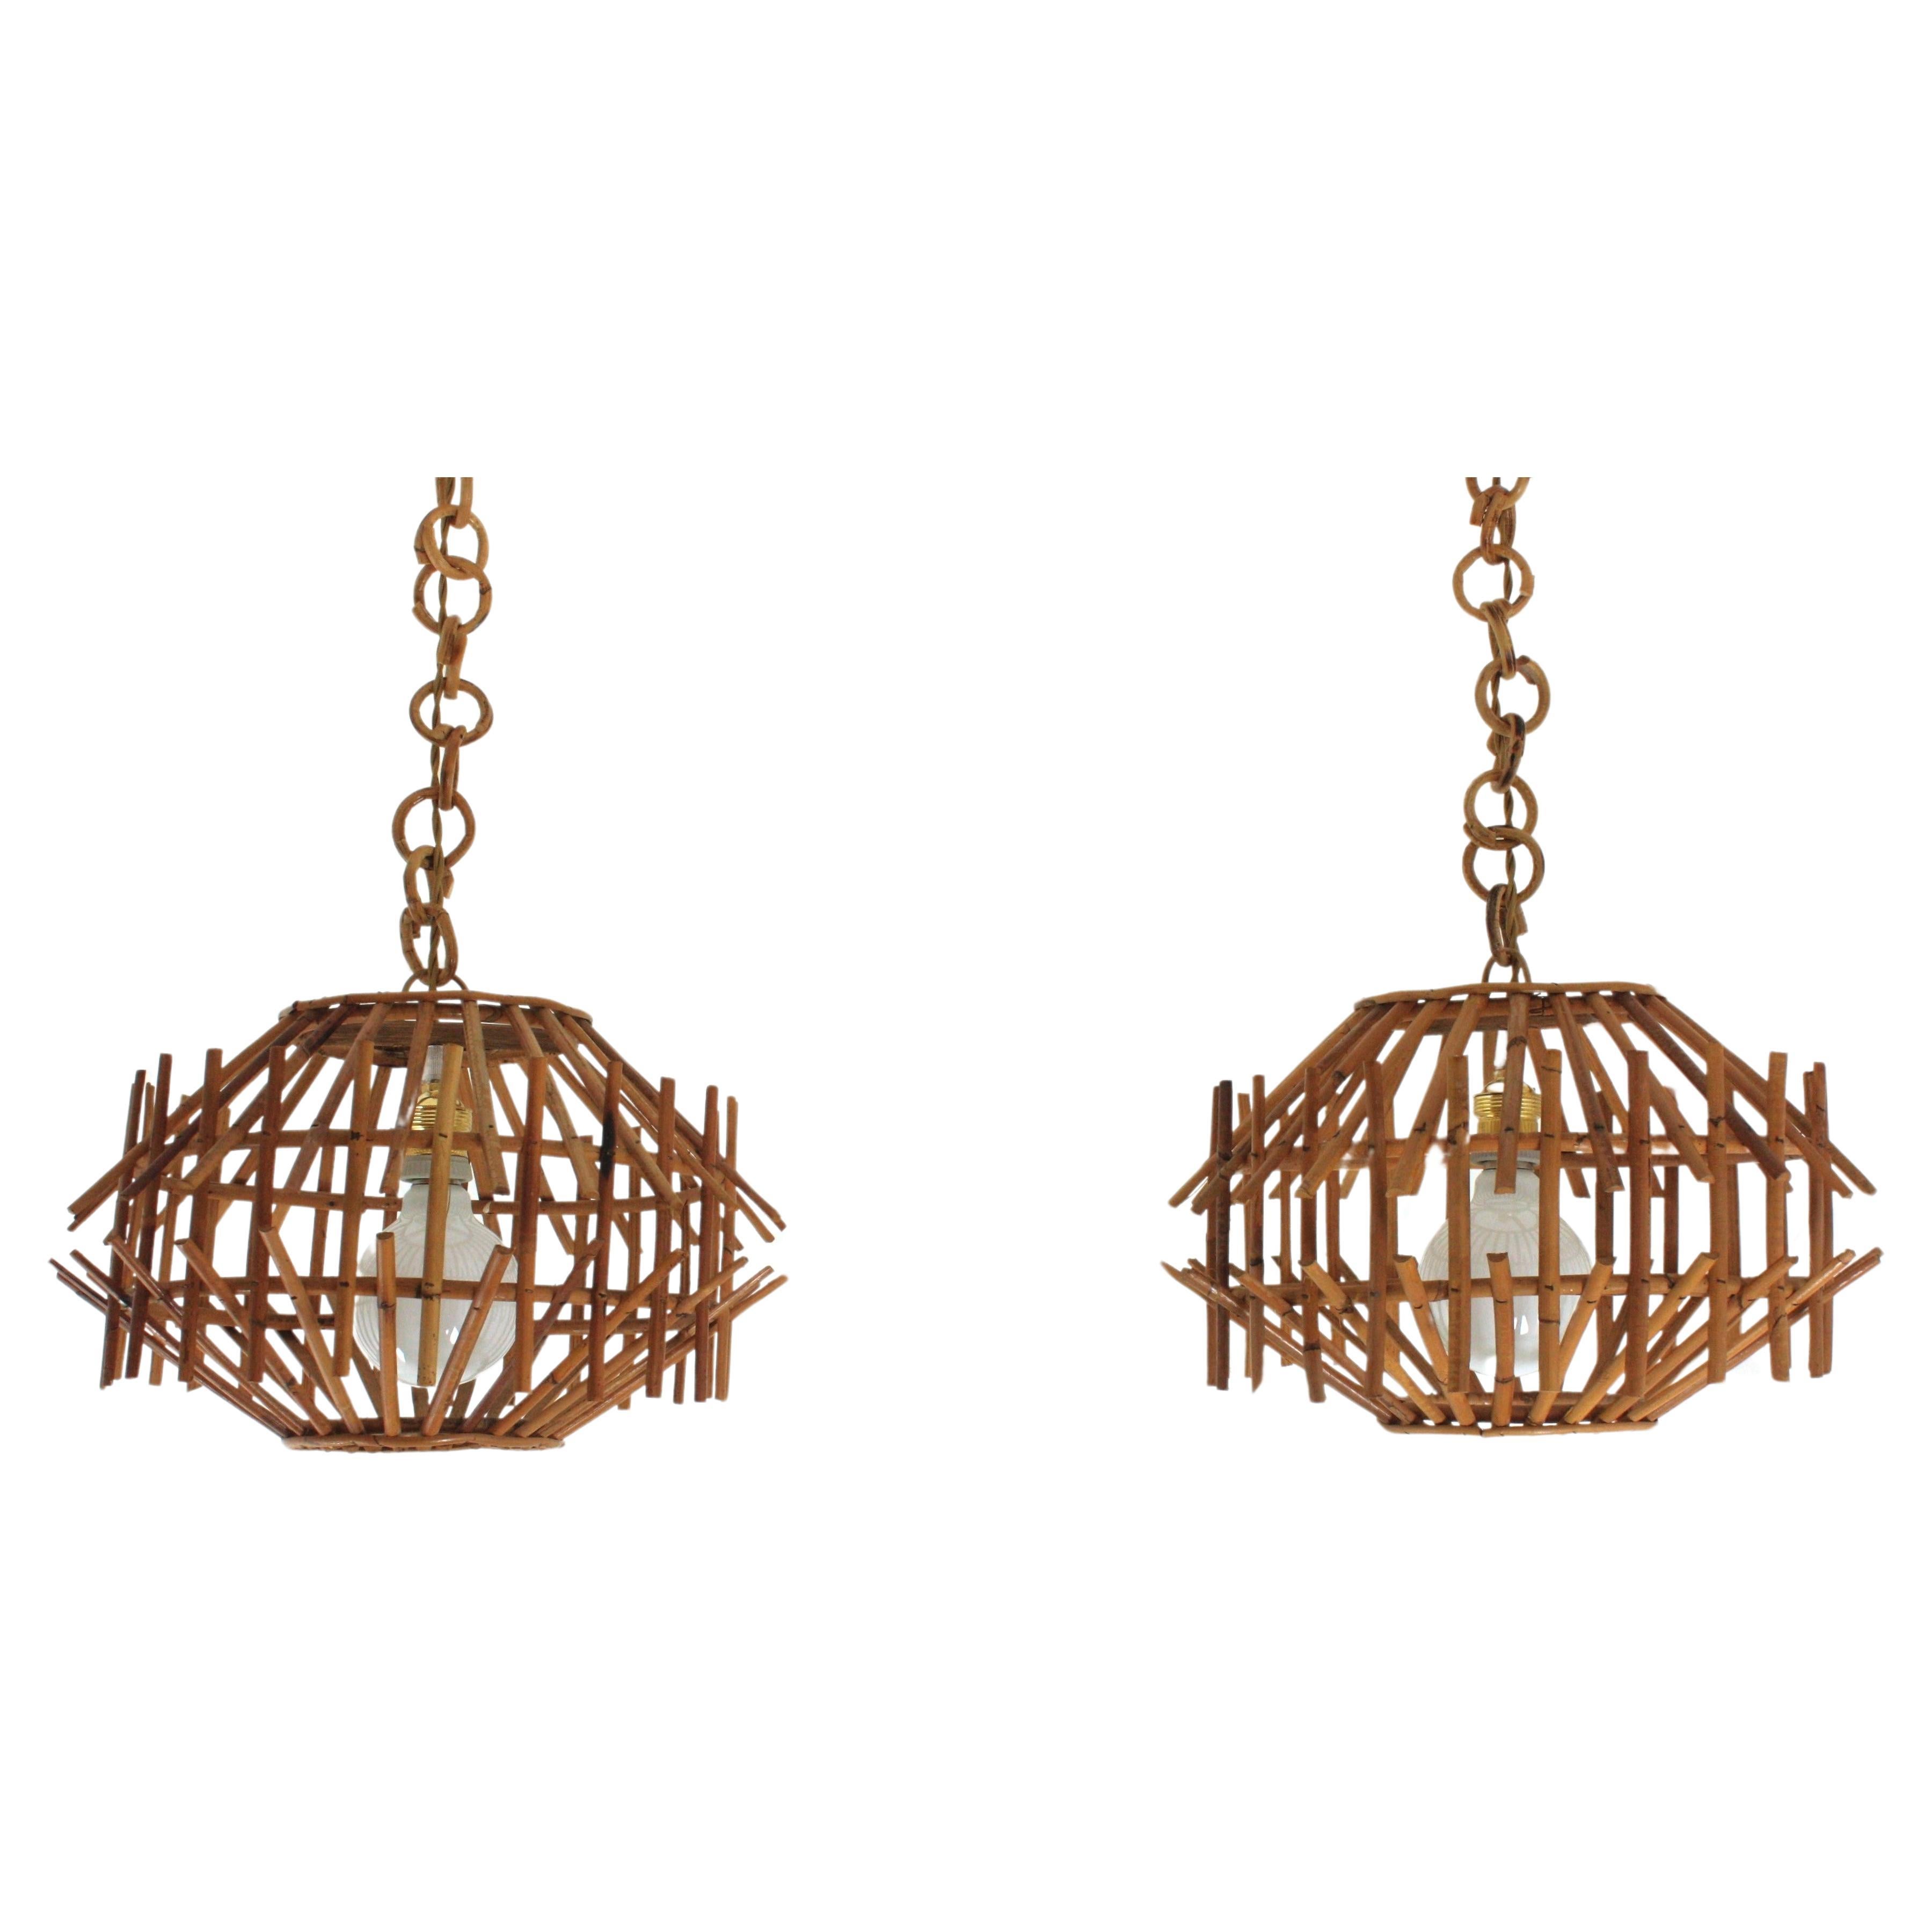 Pair of Rattan Pagoda Pendant Lights or Lanterns, 1960s For Sale